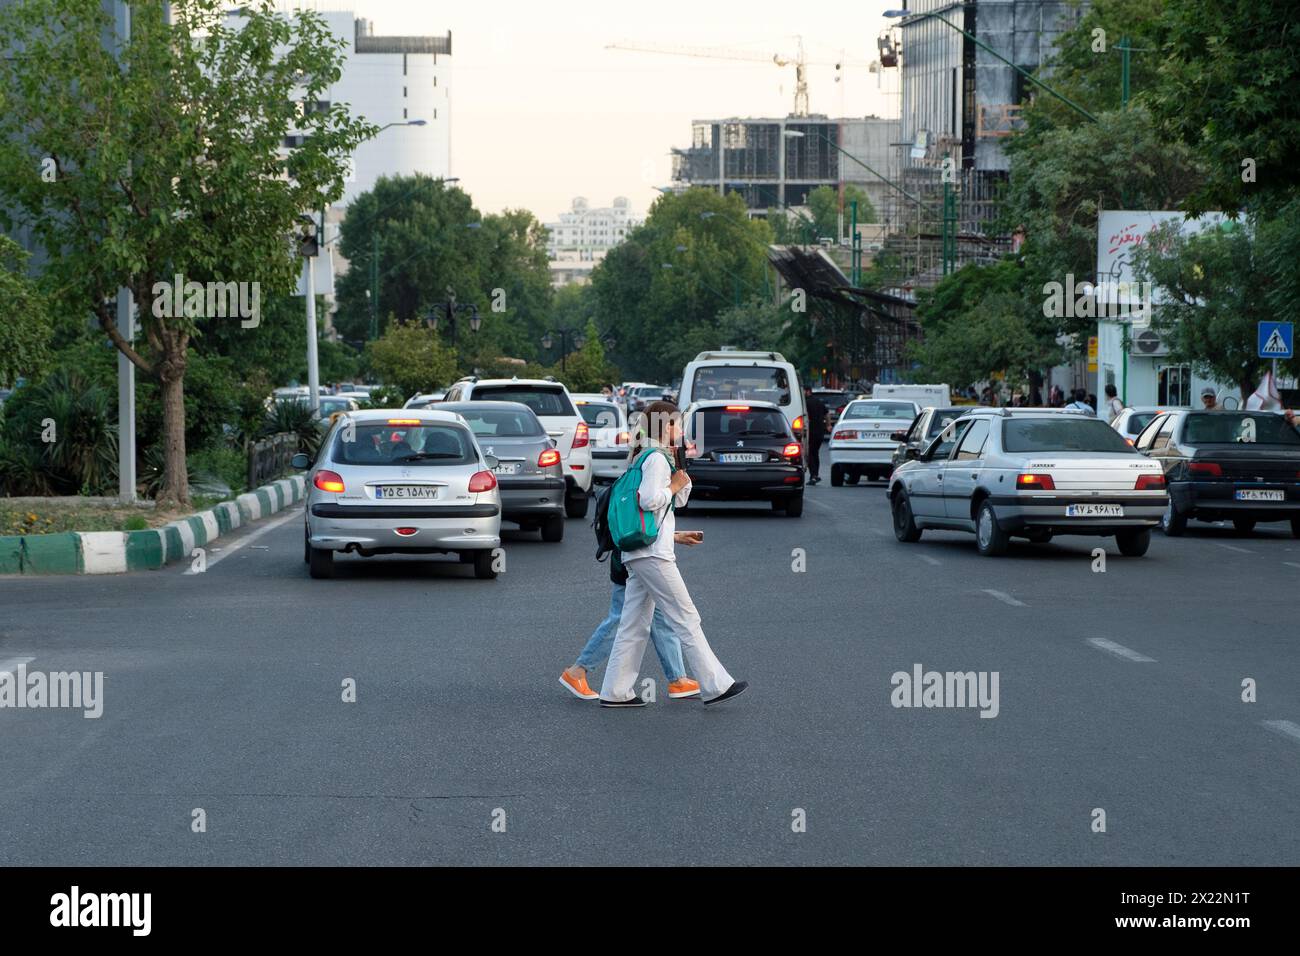 Two Iranian Girls in Tehran fighting against compulsory hijab by walking without scarfs in public. Stock Photo